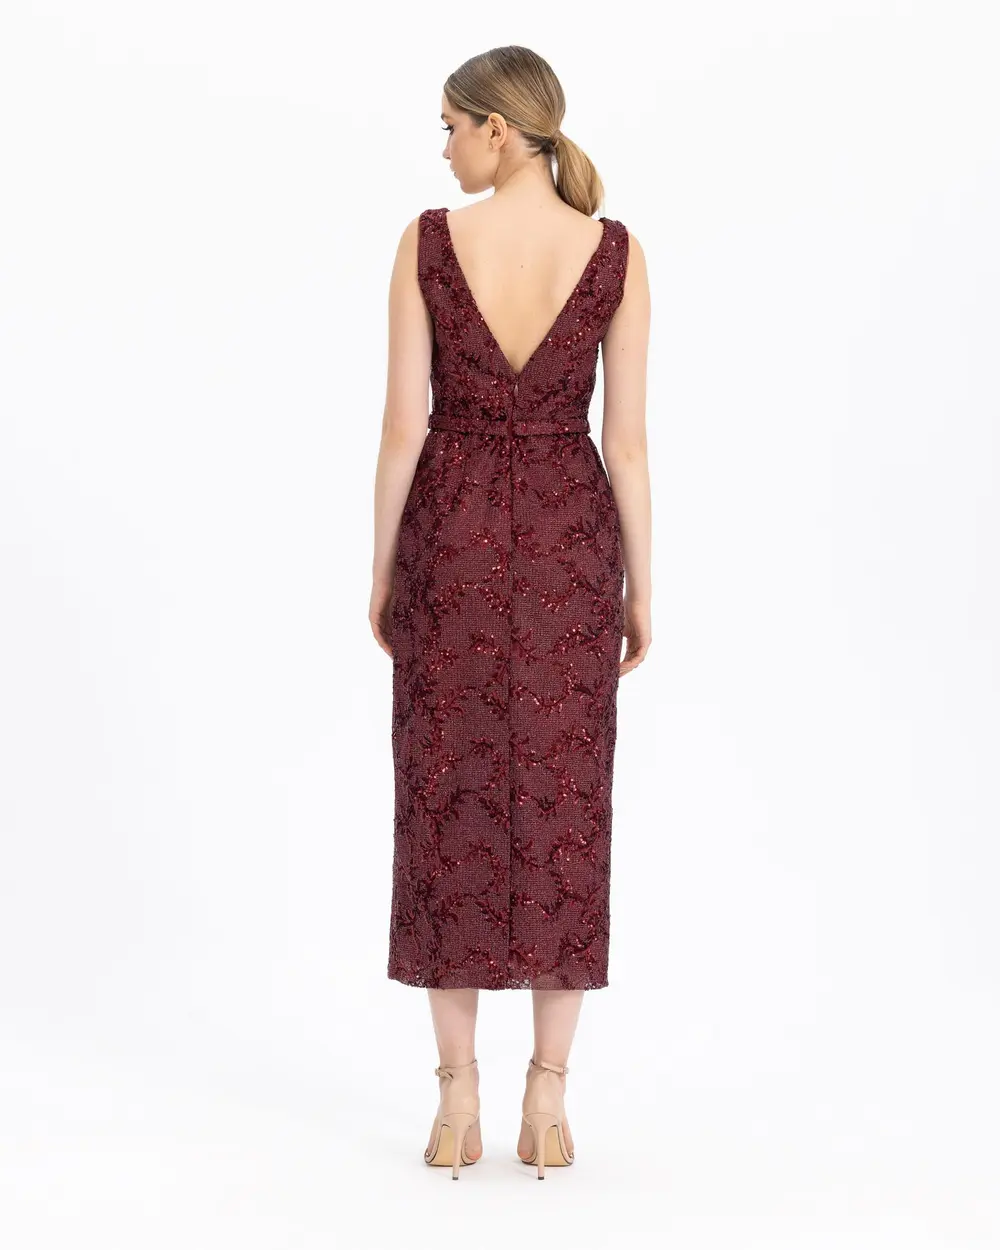 SEQUINE DETAILED PATTERNED MIDI LONG EVENING DRESS